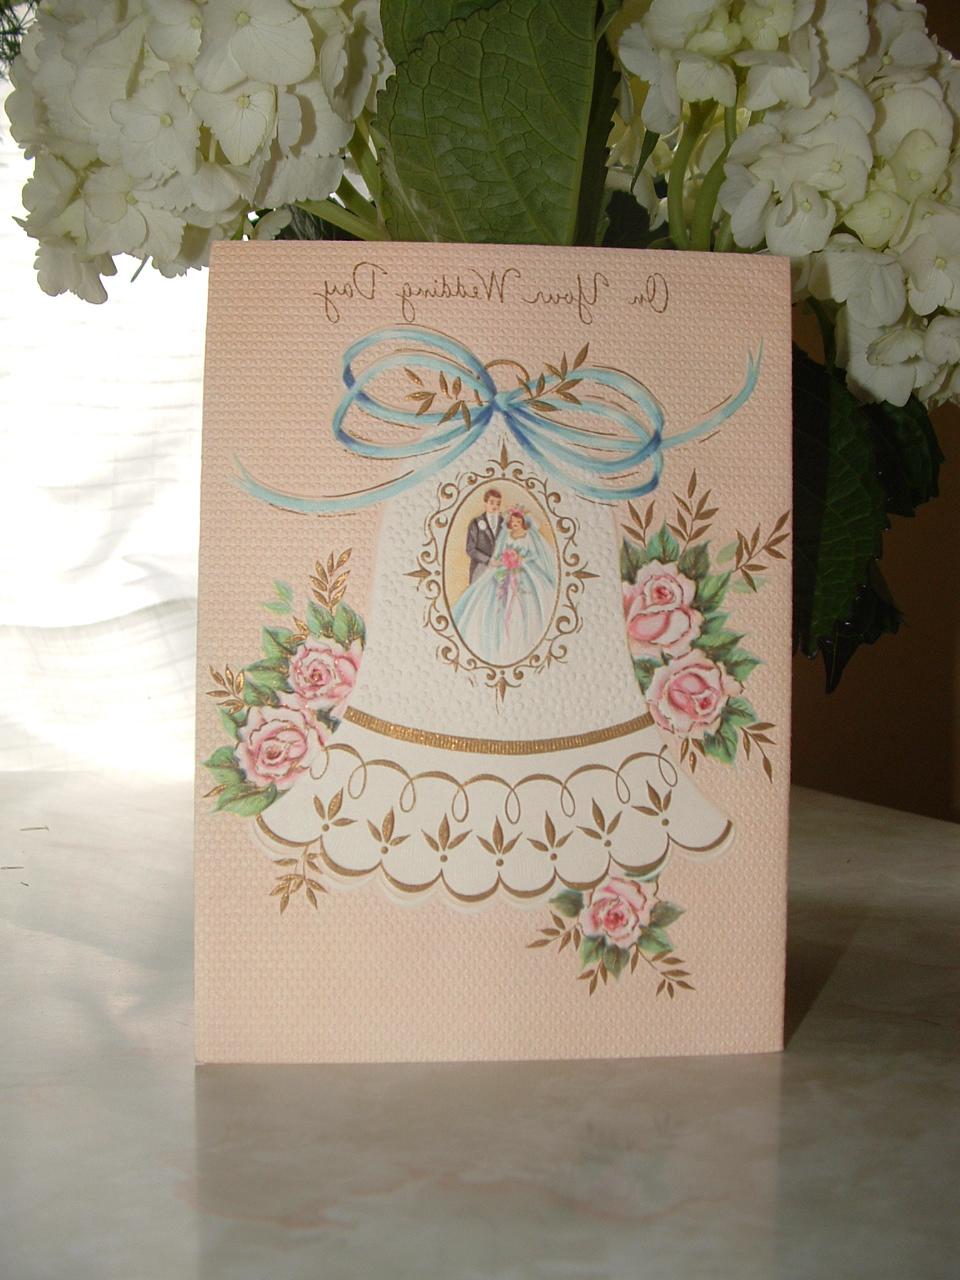 I just love this vintage wedding card that Rebecca got us.